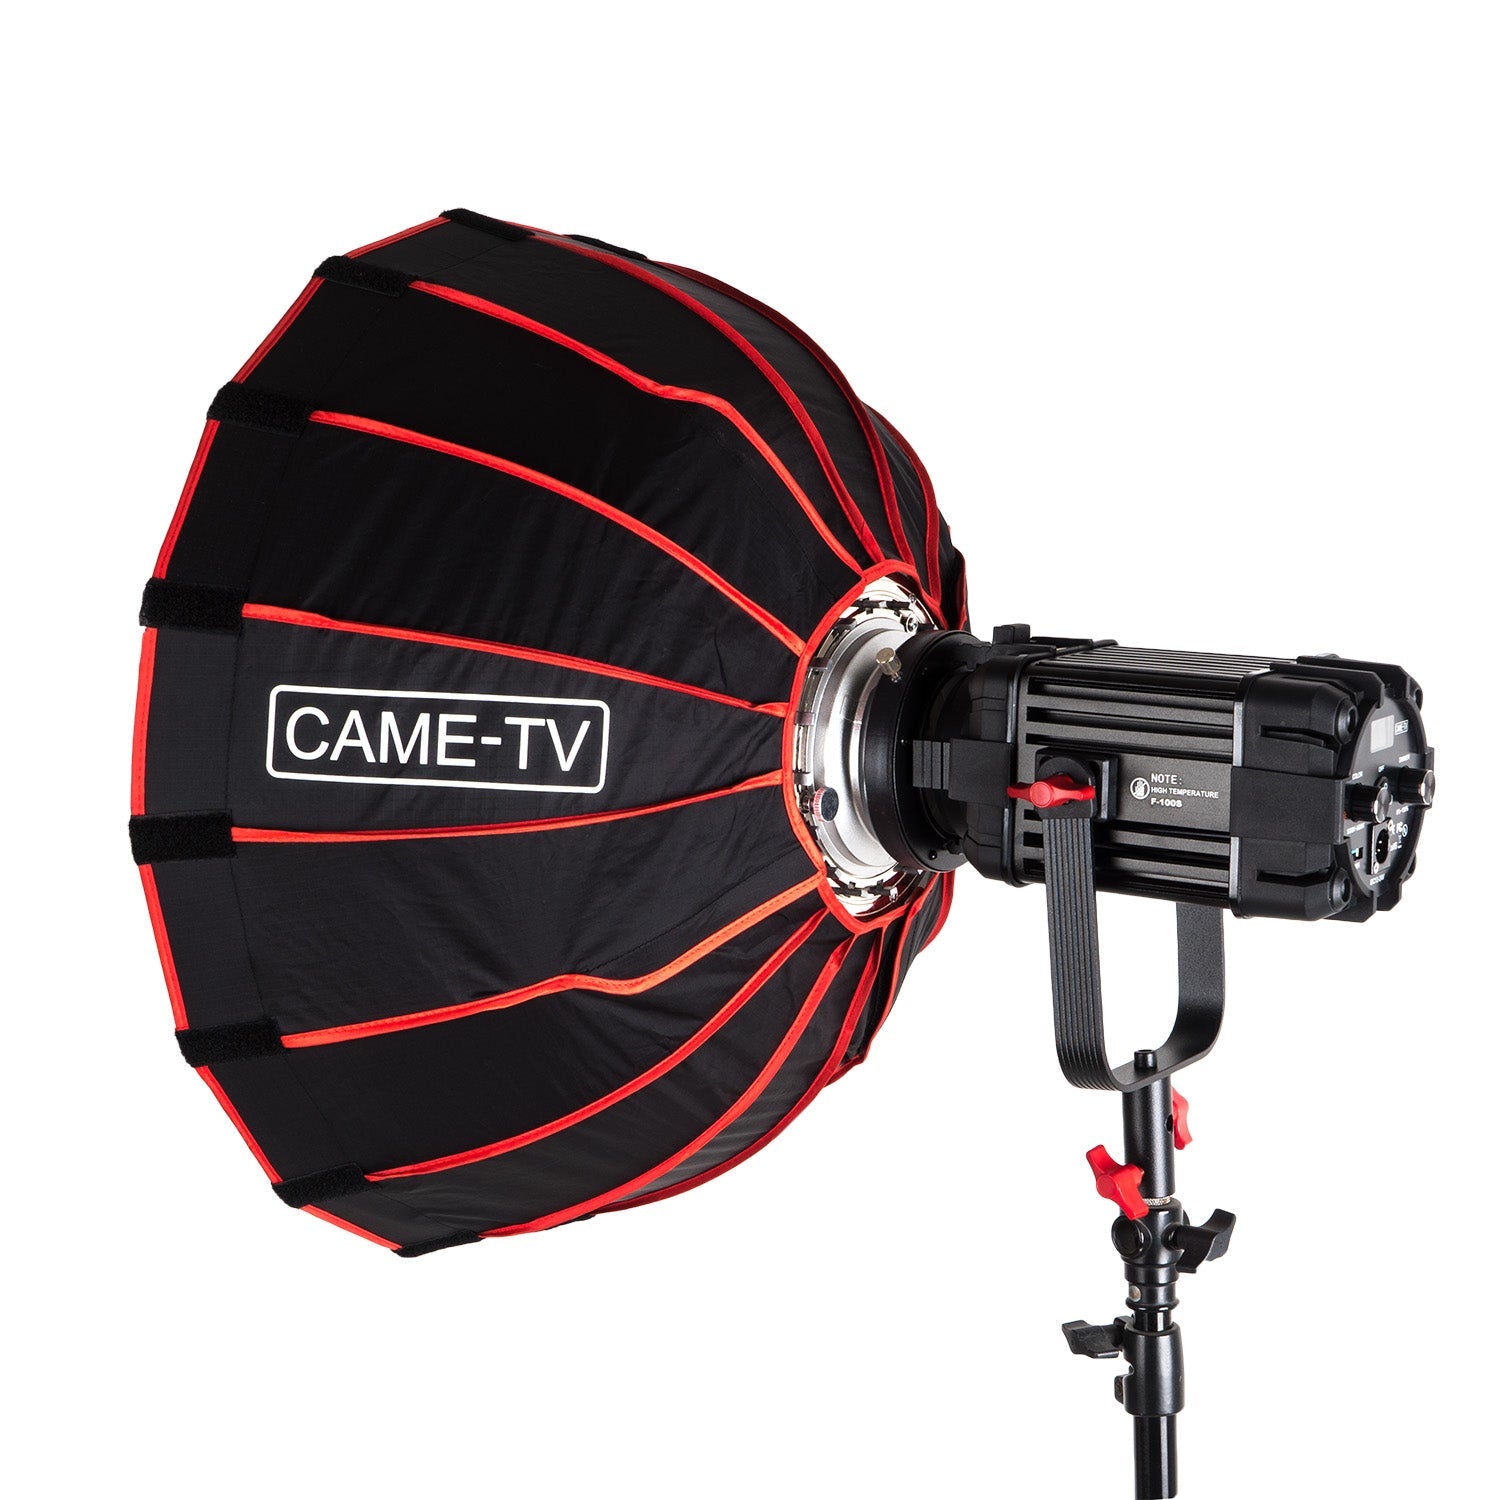 CAME-TV Boltzen MKII 100w Fresnel Fanless Focusable LED Daylight 29700 Lux@1m - CAME-TV